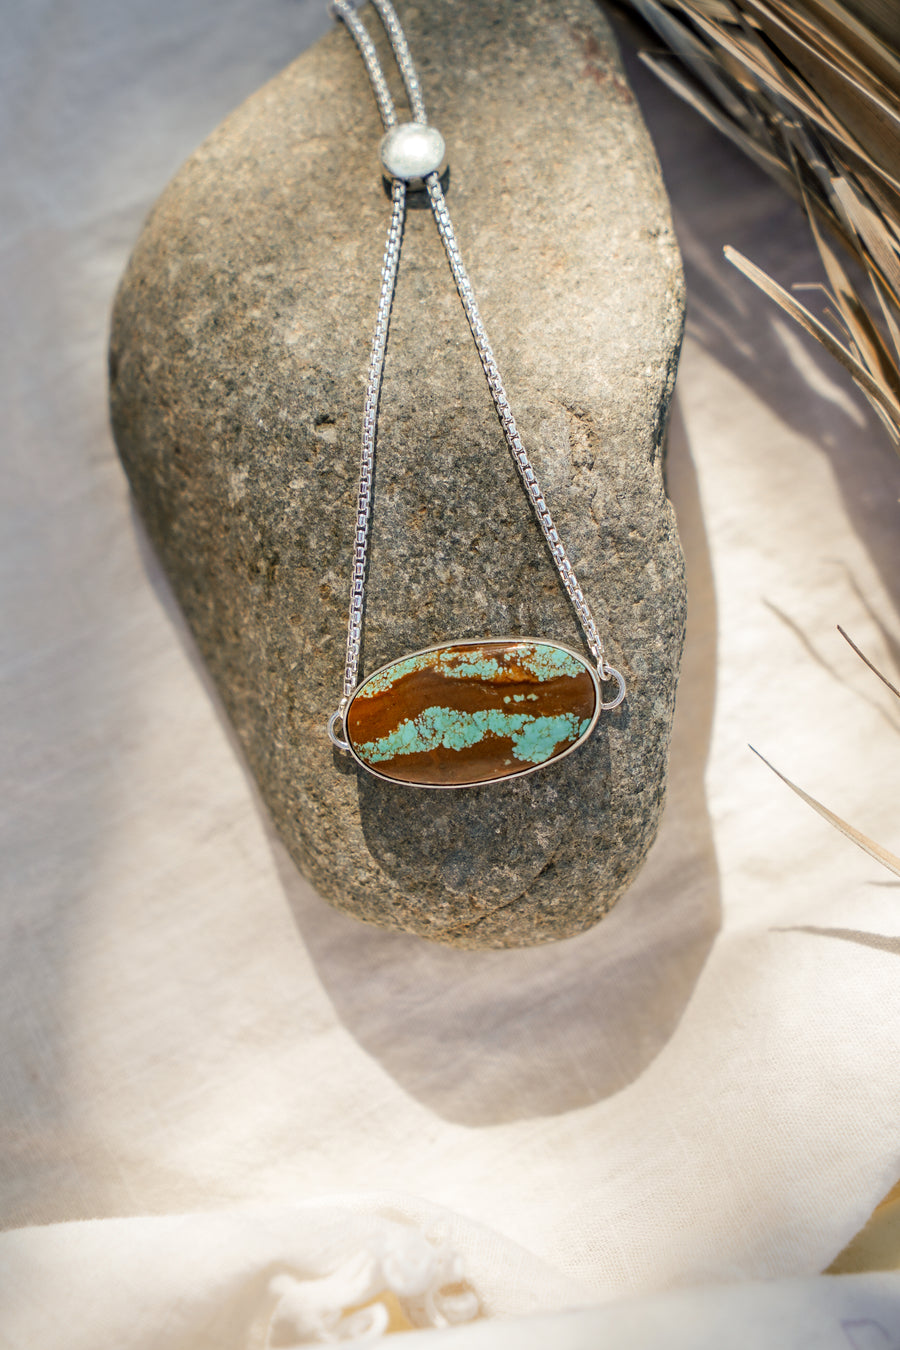 The Out West Box Chain in No. 8 Turquoise